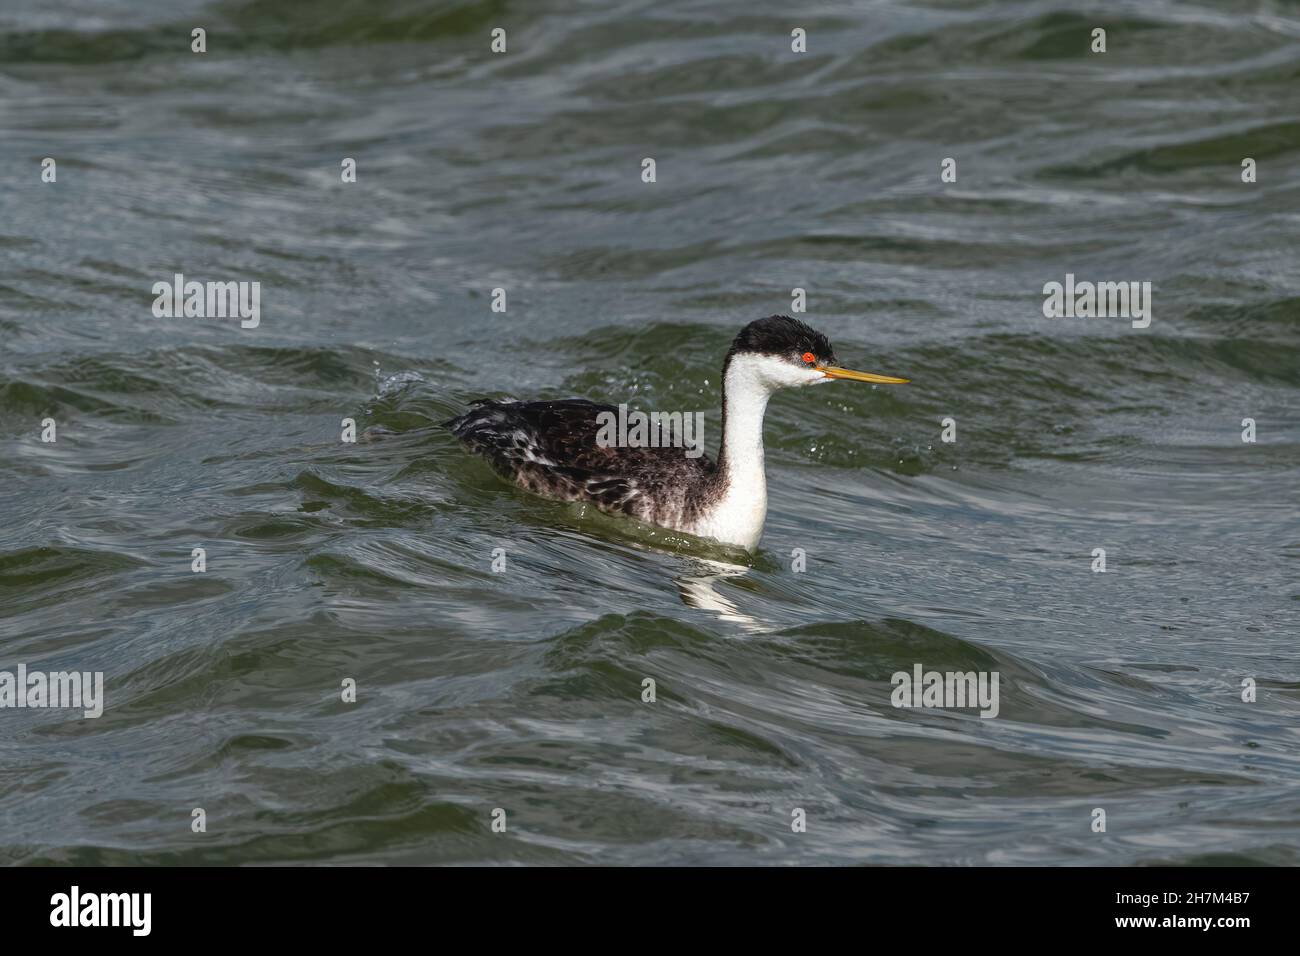 A Western Grebe with bright orange at the base of its bill, swimming over a wave in a turbulent, choppy lake. Stock Photo